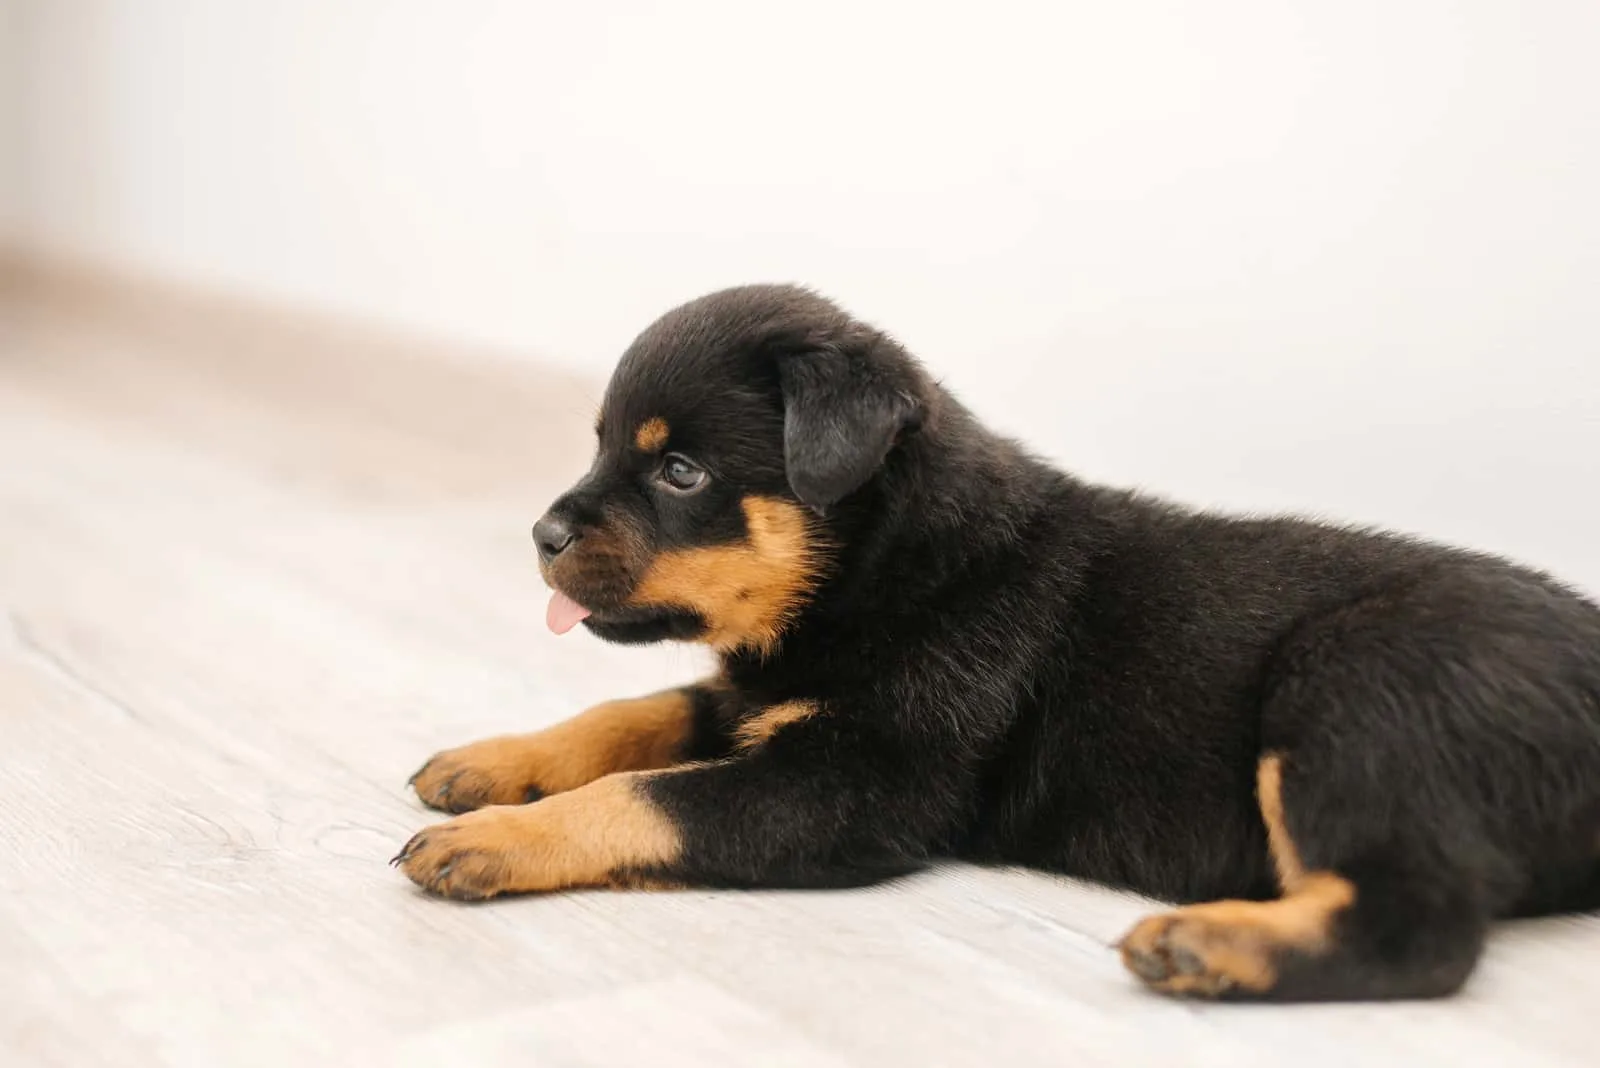 The Rottweiler puppy is lying on the floor